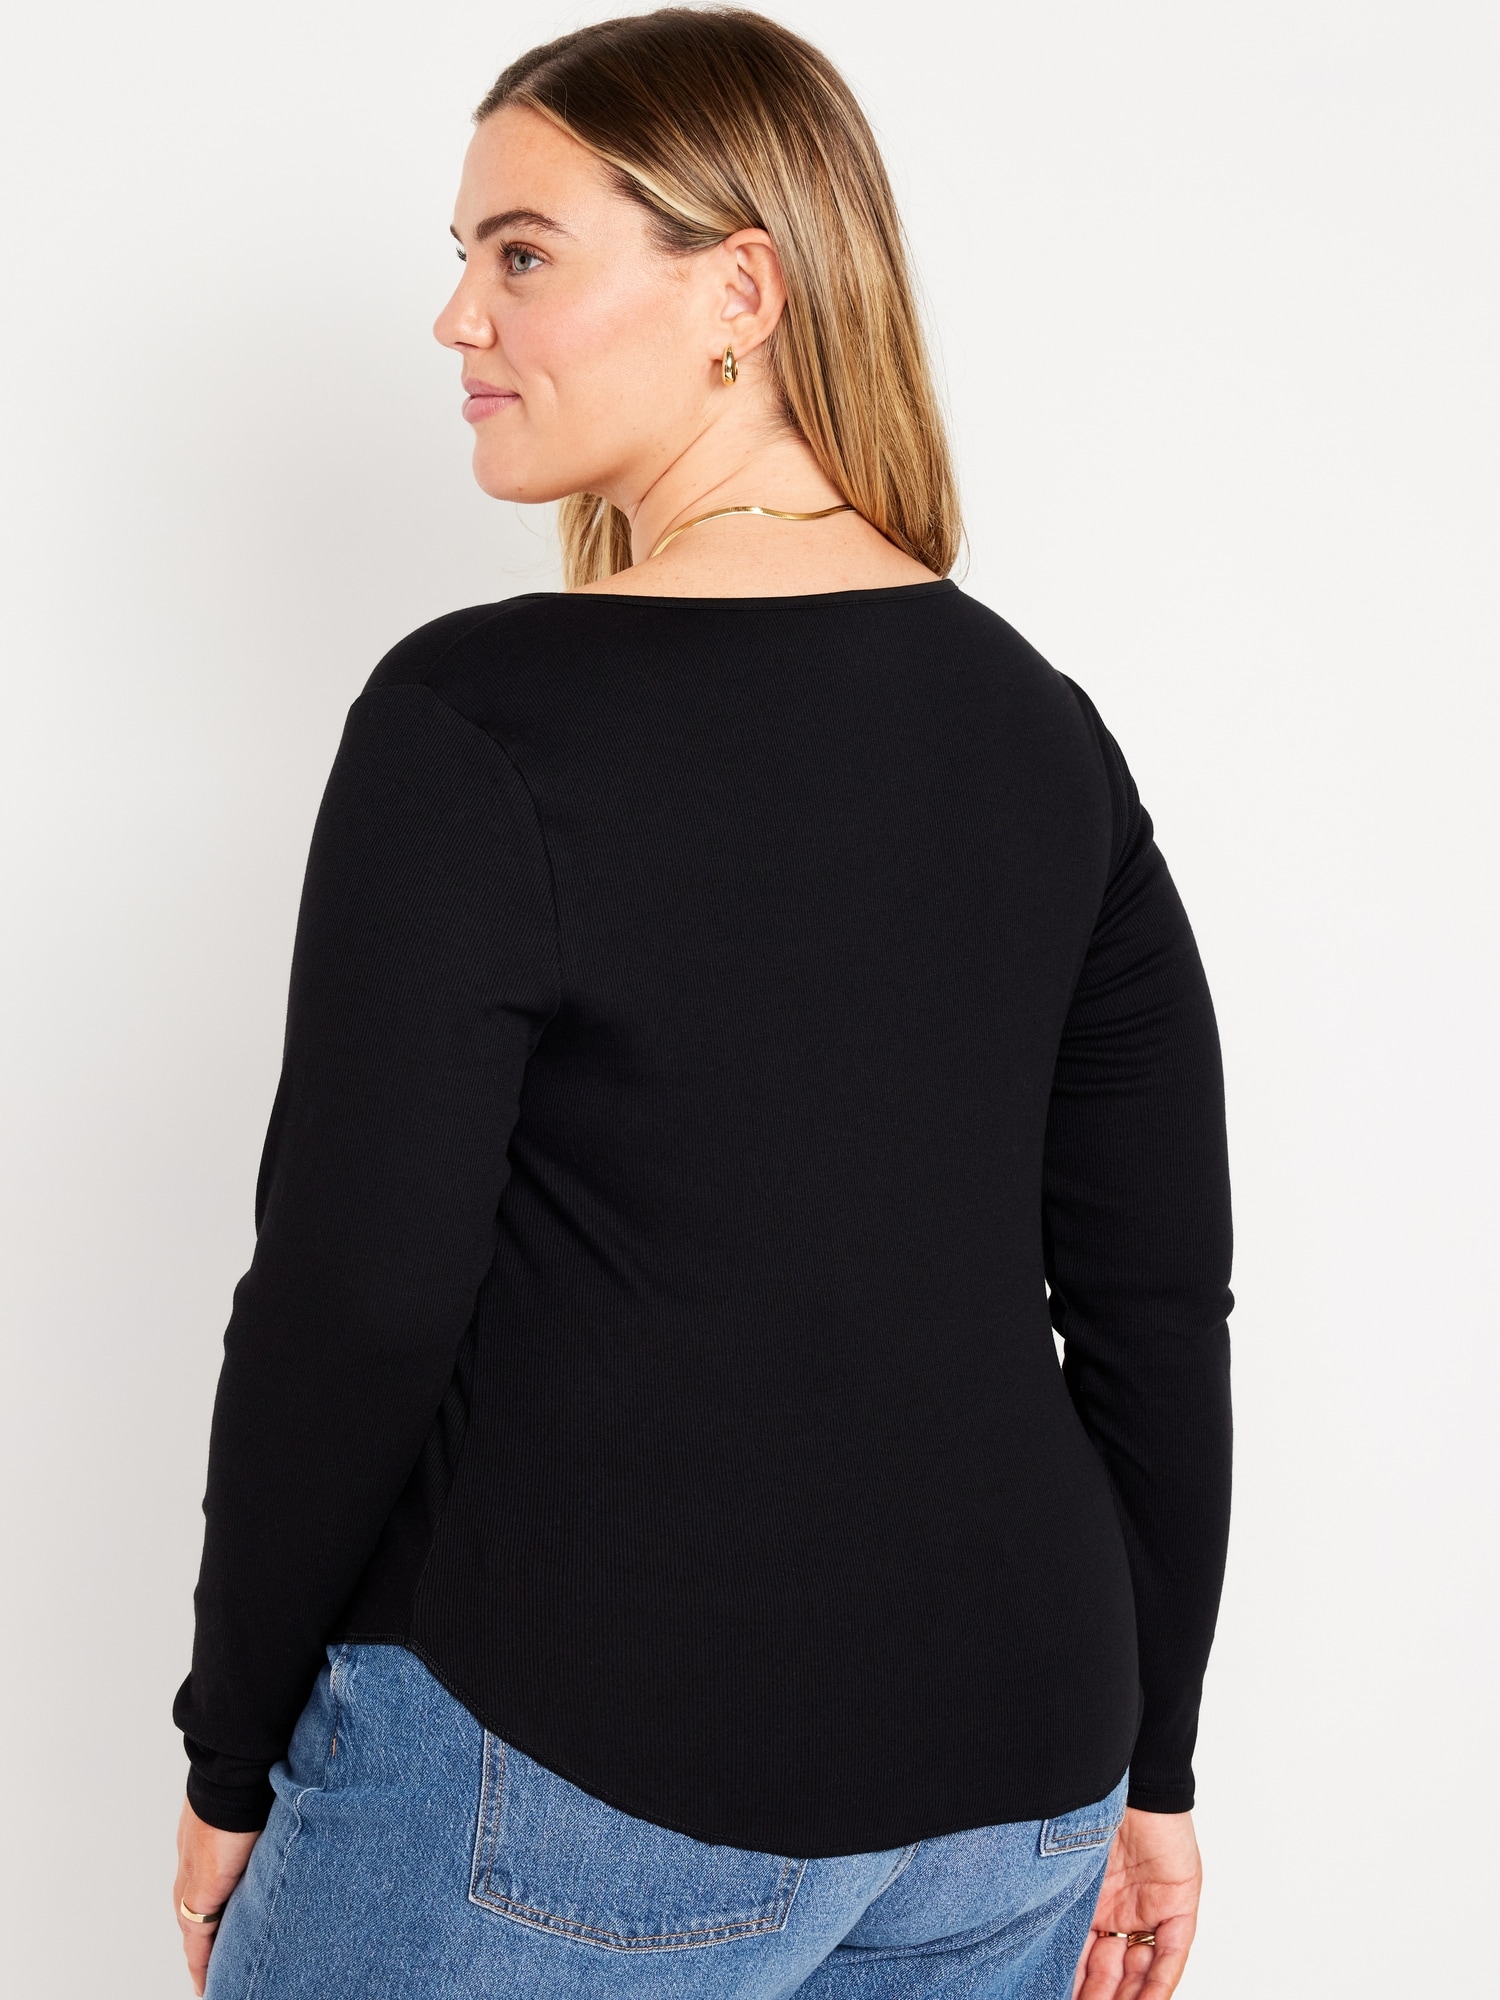 Long-Sleeve T-Shirt Fitted Navy Old Rib-Knit for Women |